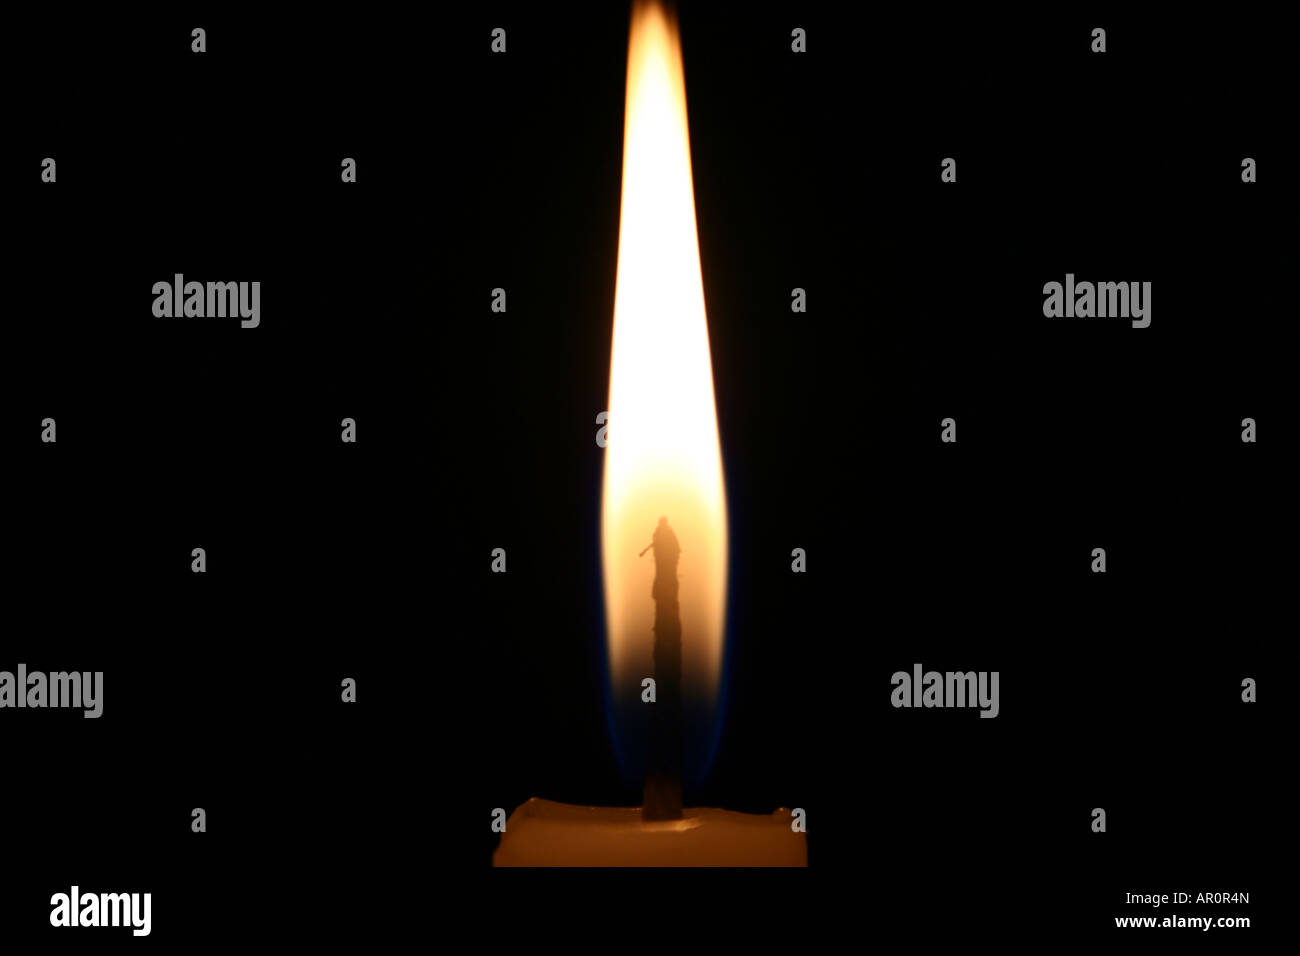 Zones of a flame Stock Photo